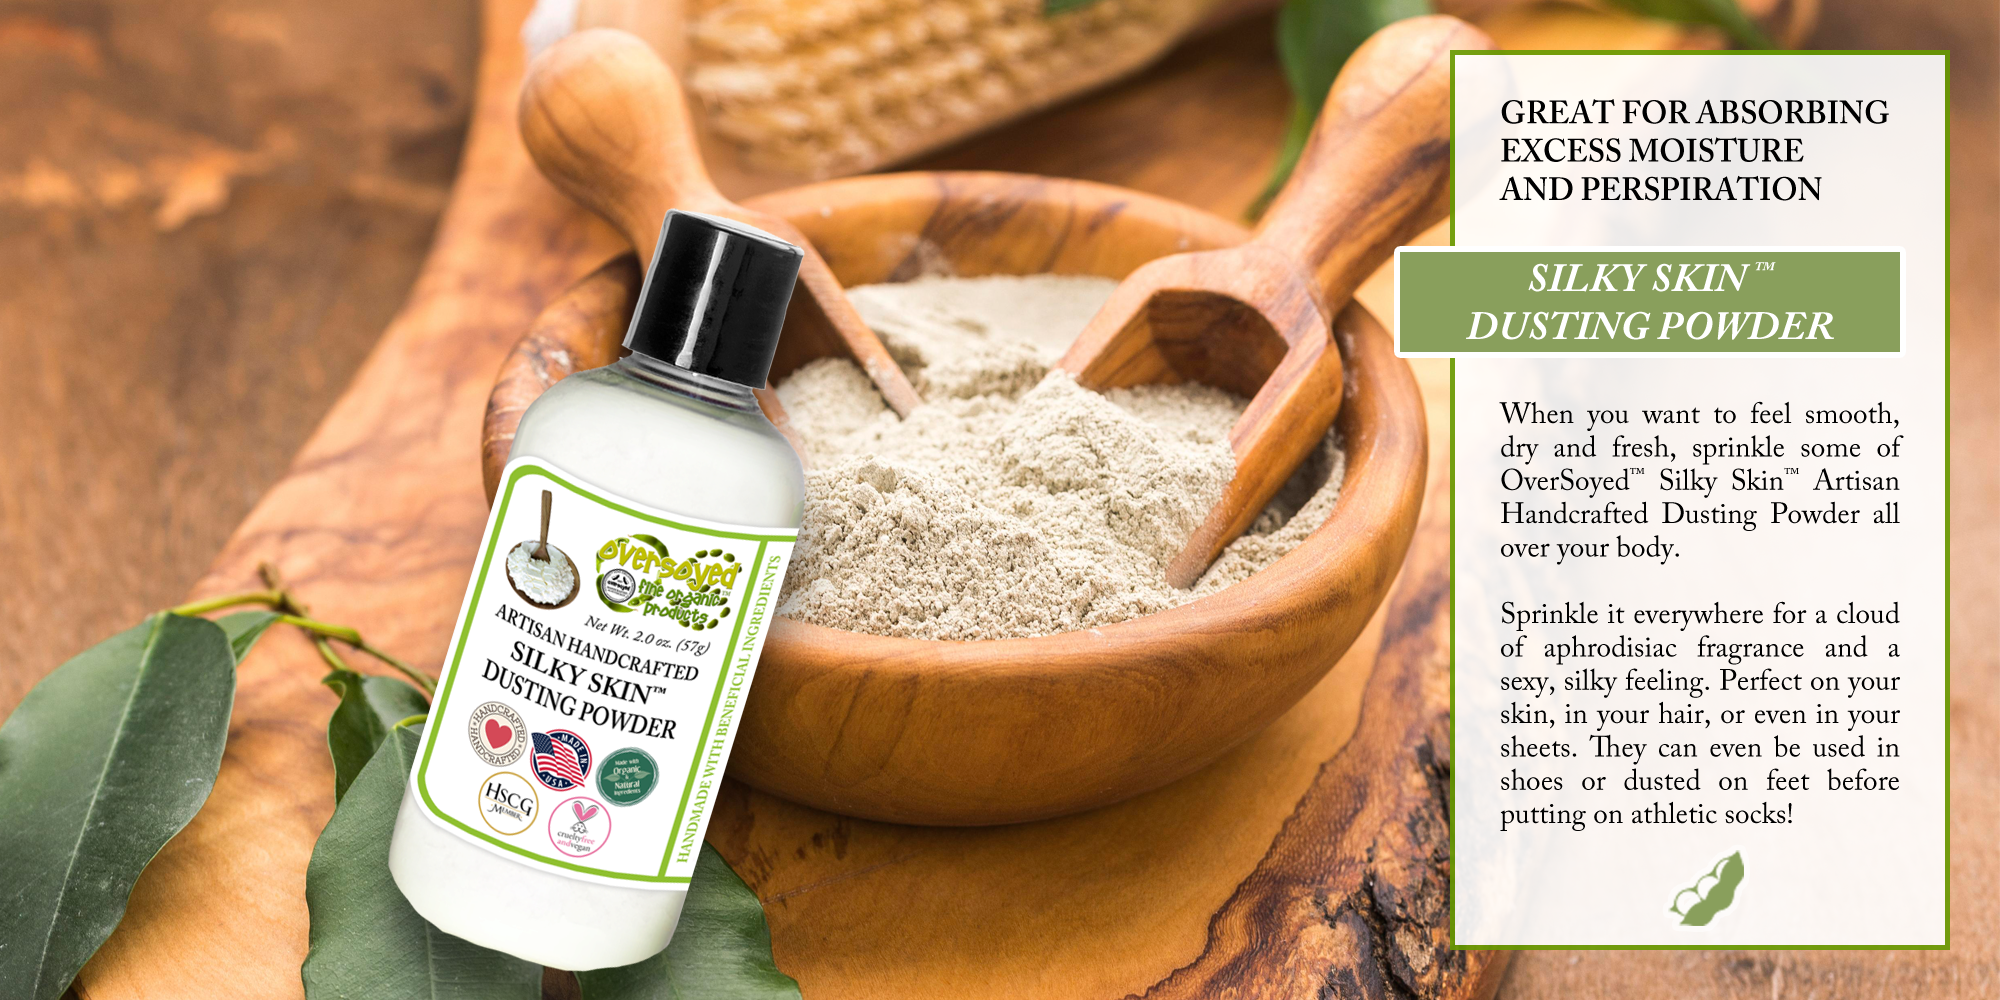 OverSoyed Fine Organic Products - Artisan Handcrafted Silky Skin™ Dusting Powder